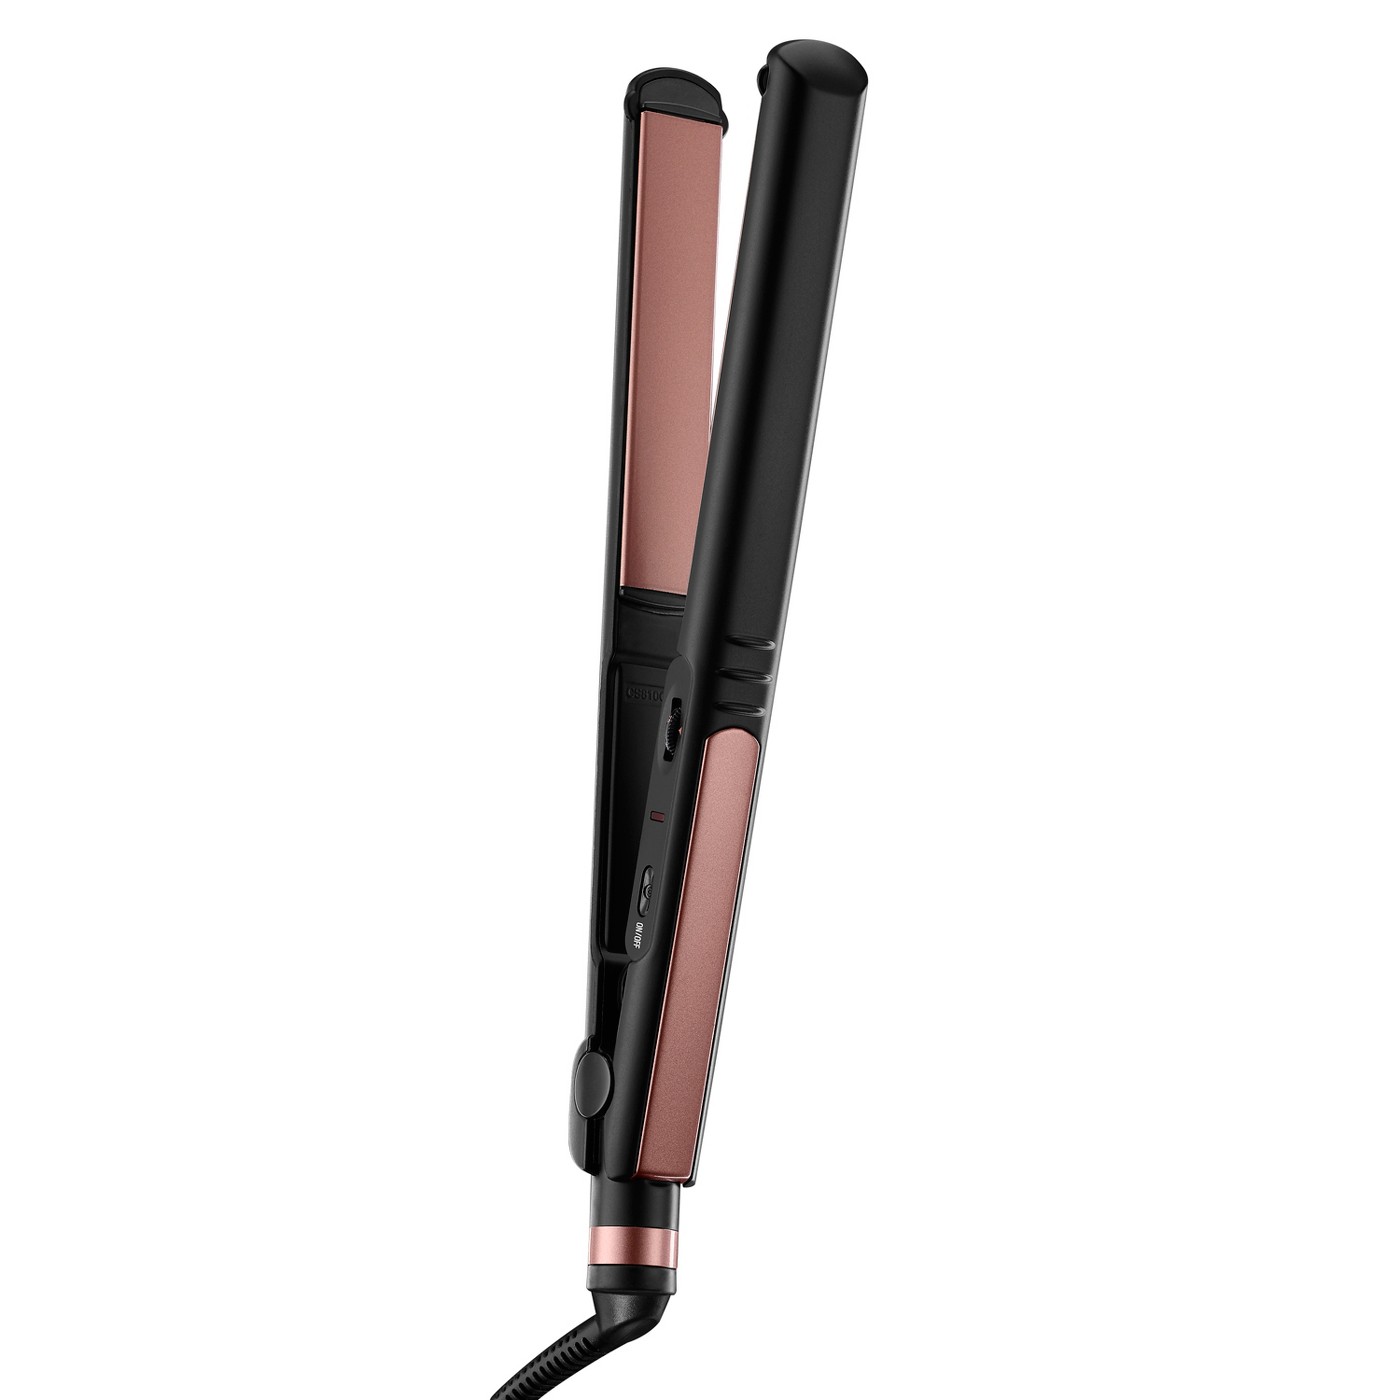 InfinitiPro by Conair Rose Gold Flat Iron - 1" - image 1 of 3